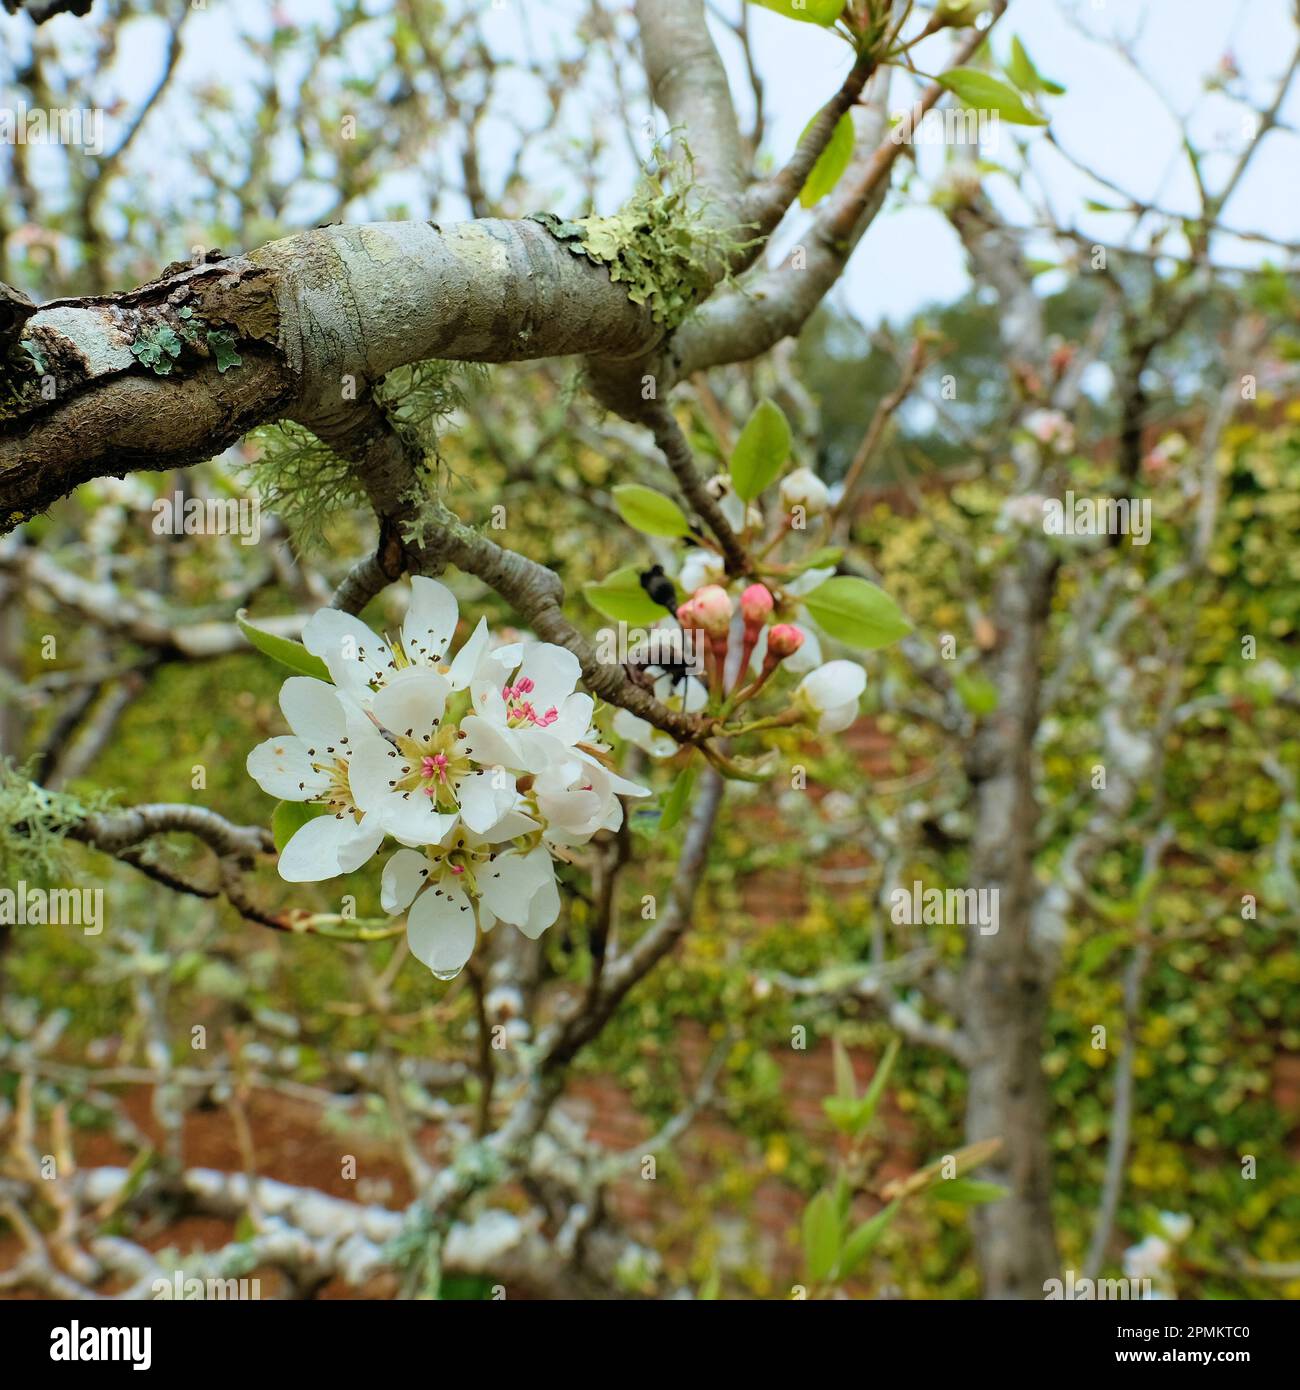 Spring time white flower blossoms and buds on a Seckel variety pear tree, part of the Pyrus communis pear family. Stock Photo